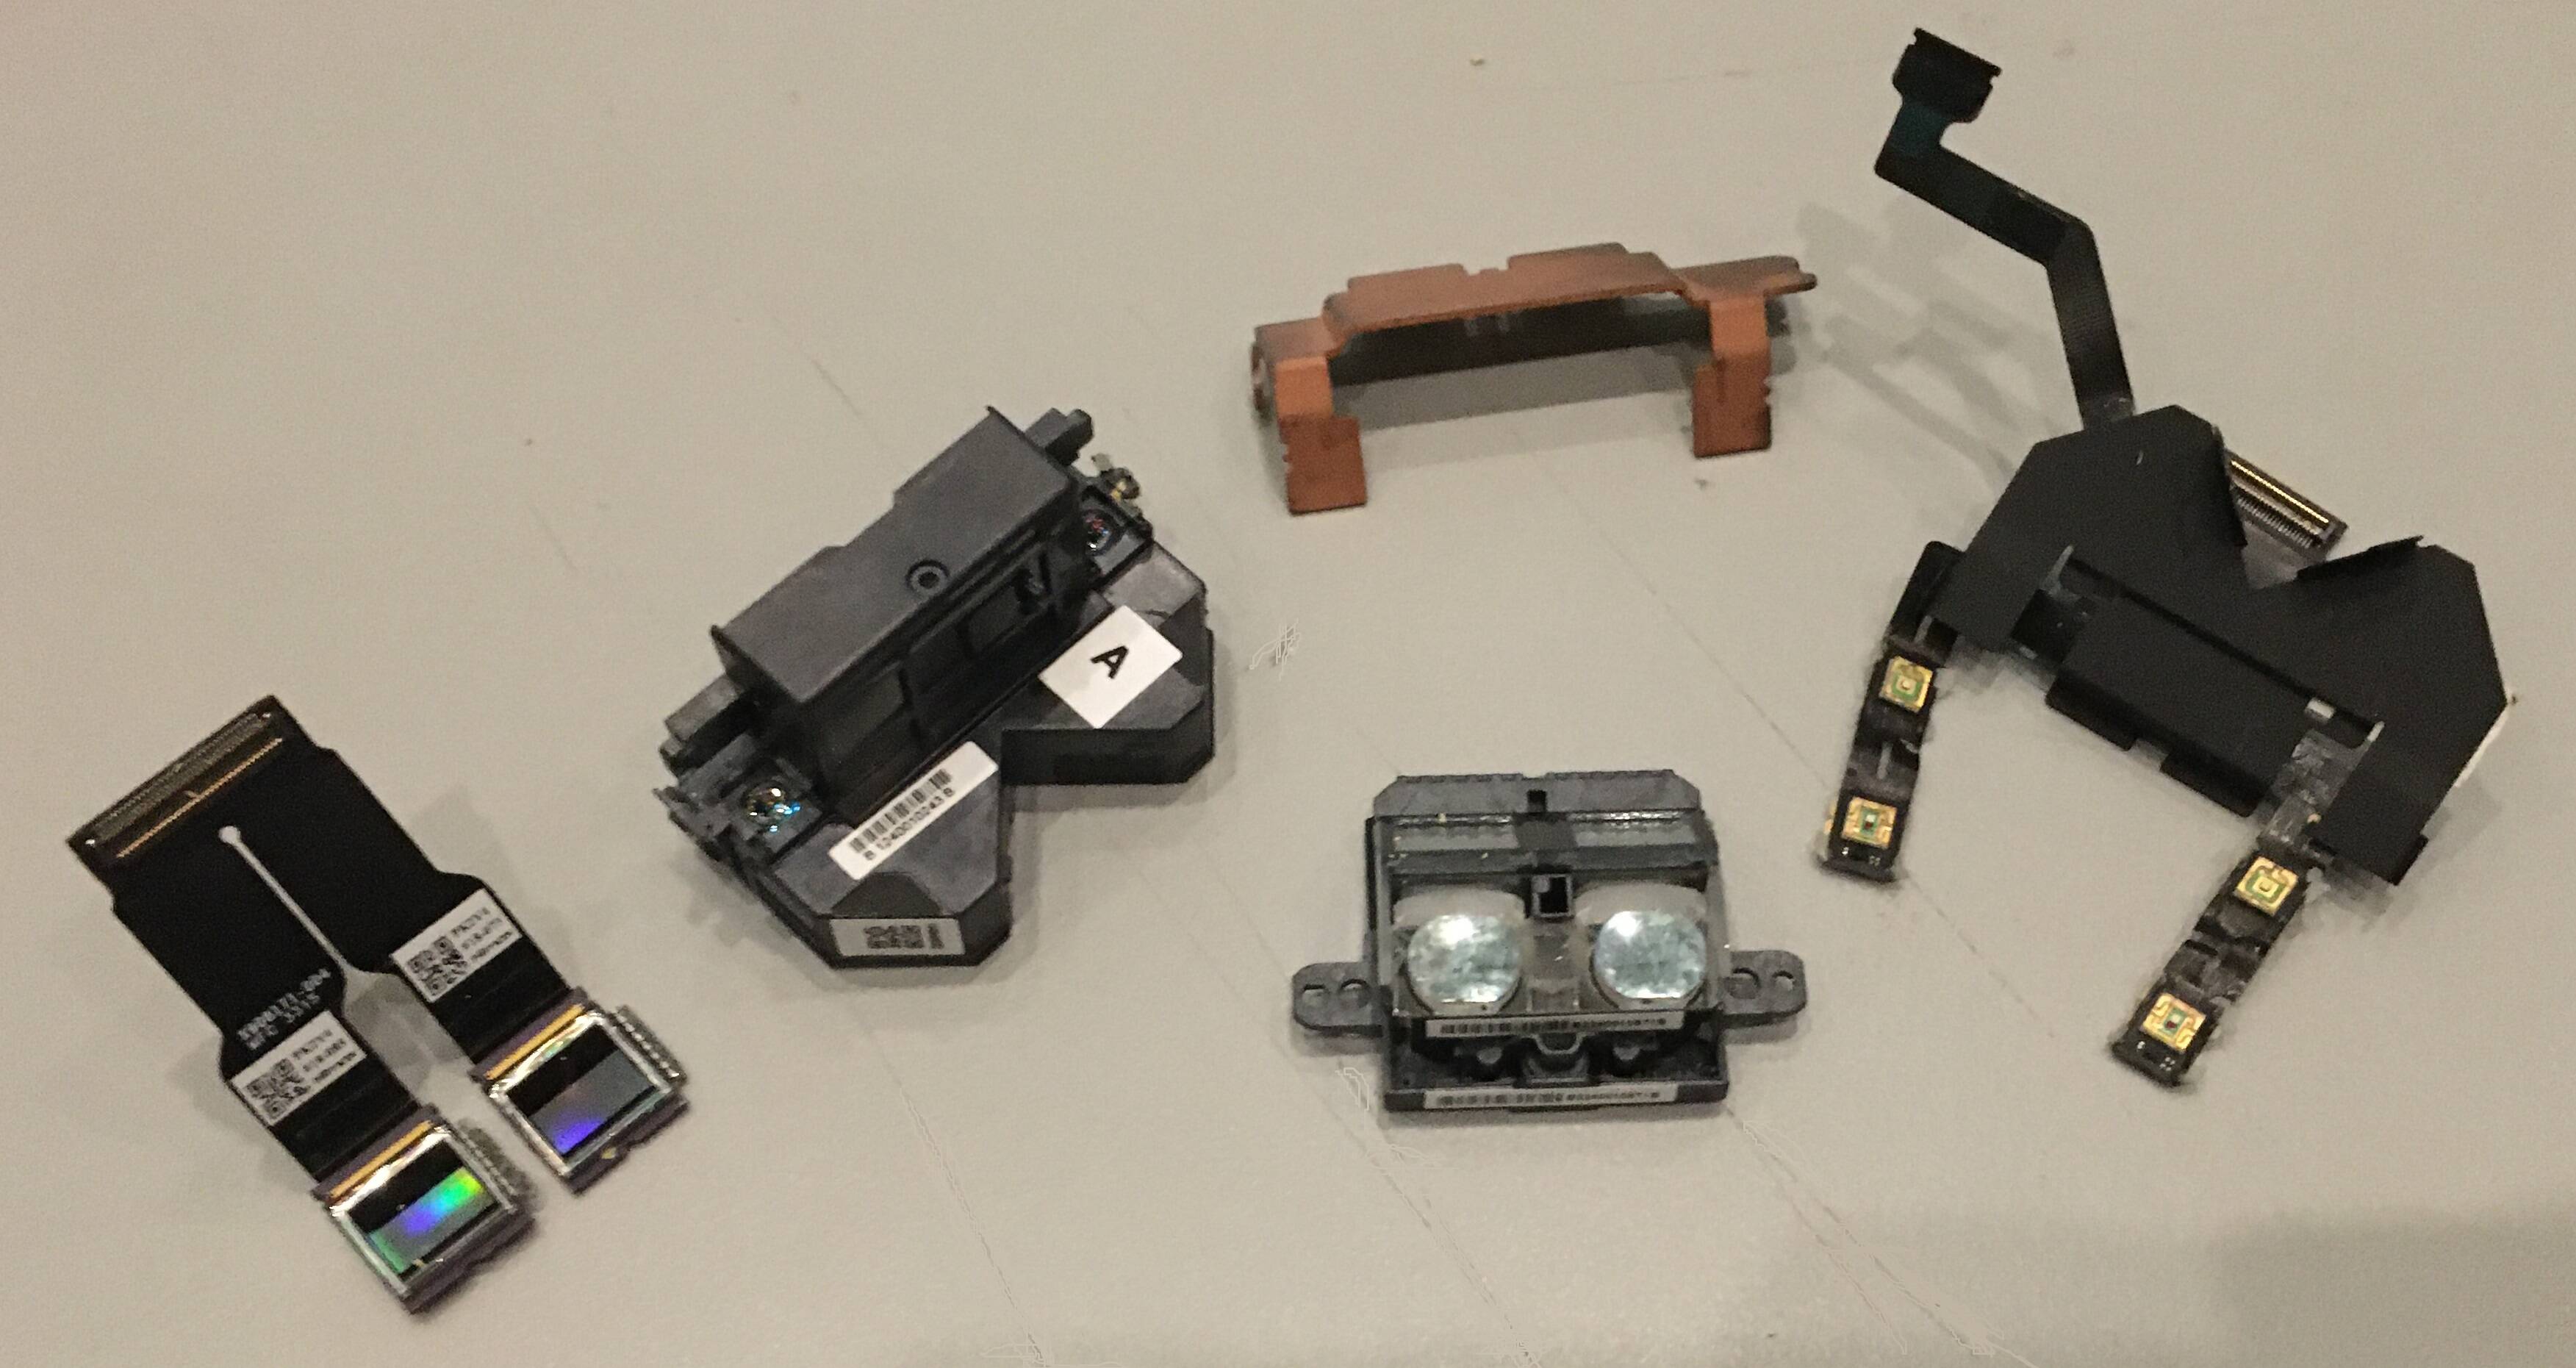 Hololens Two disassembled